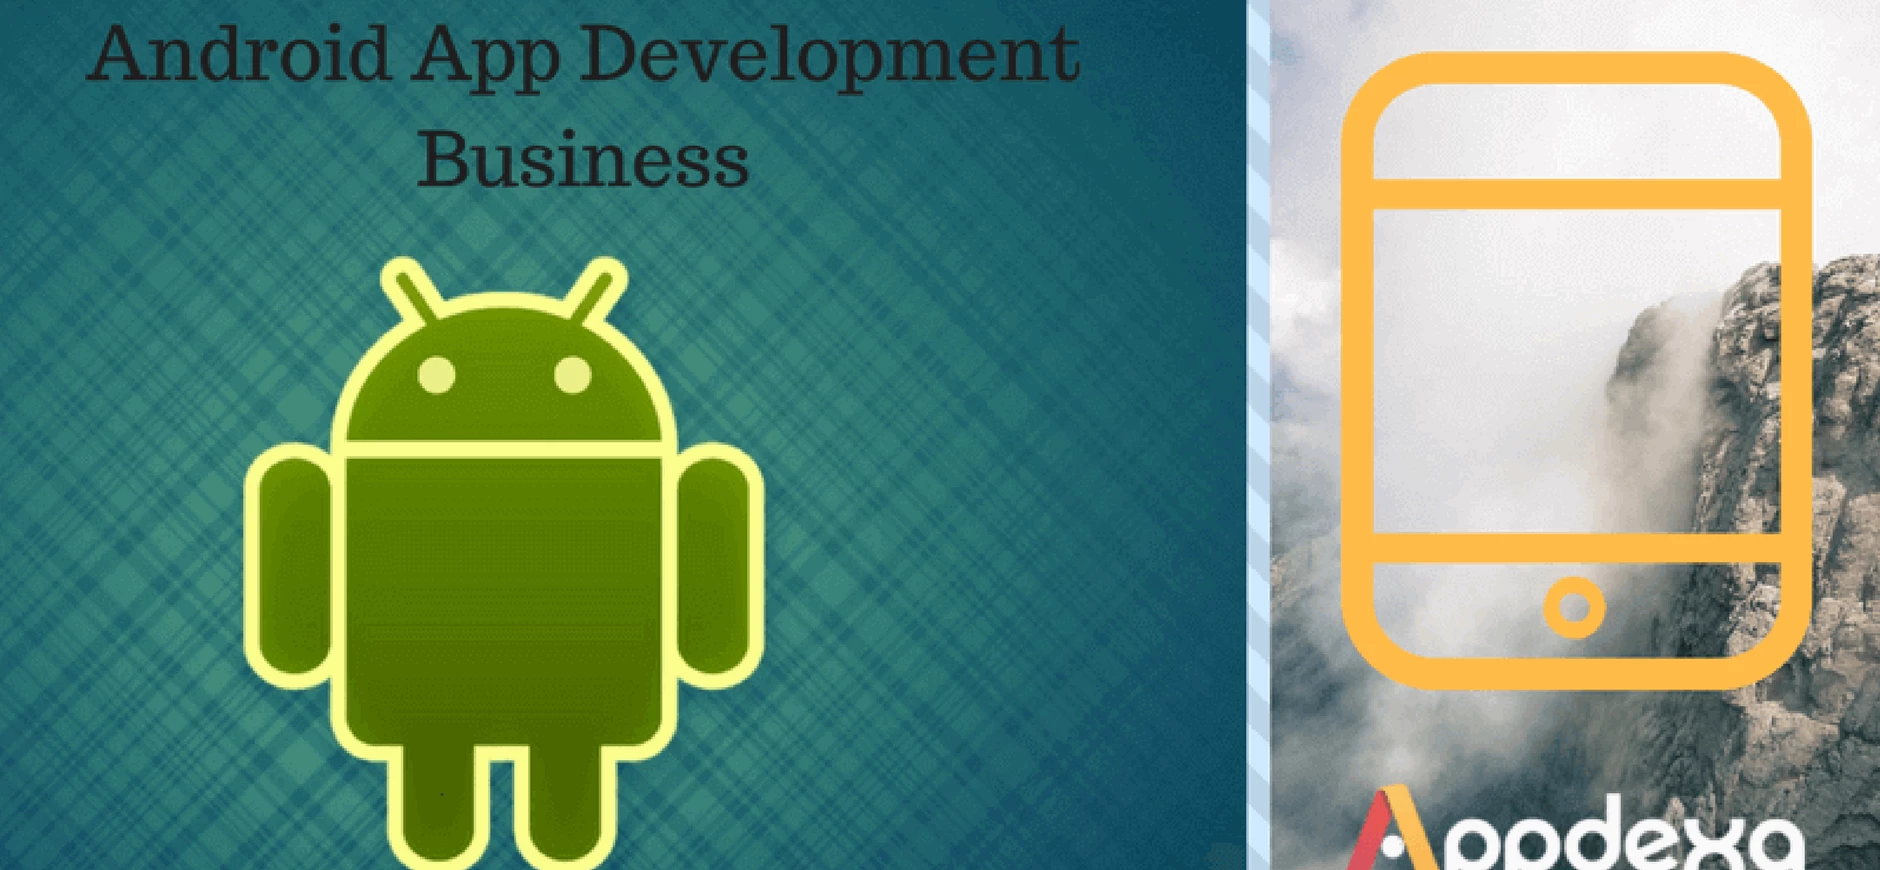 Android App Development Business